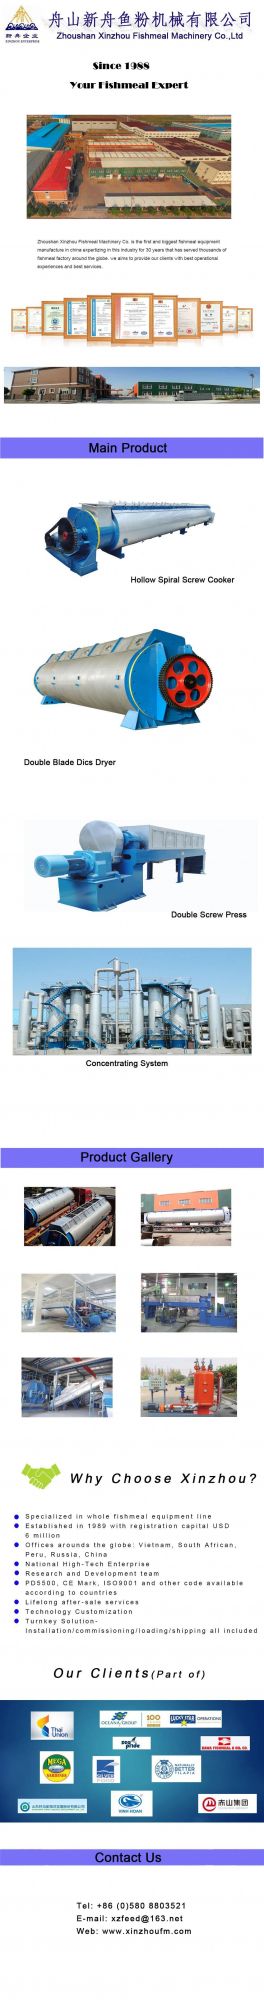 Poutry Processing Waste Treatment to Make Poutry Meal and Oil (Xinzhou Brand)